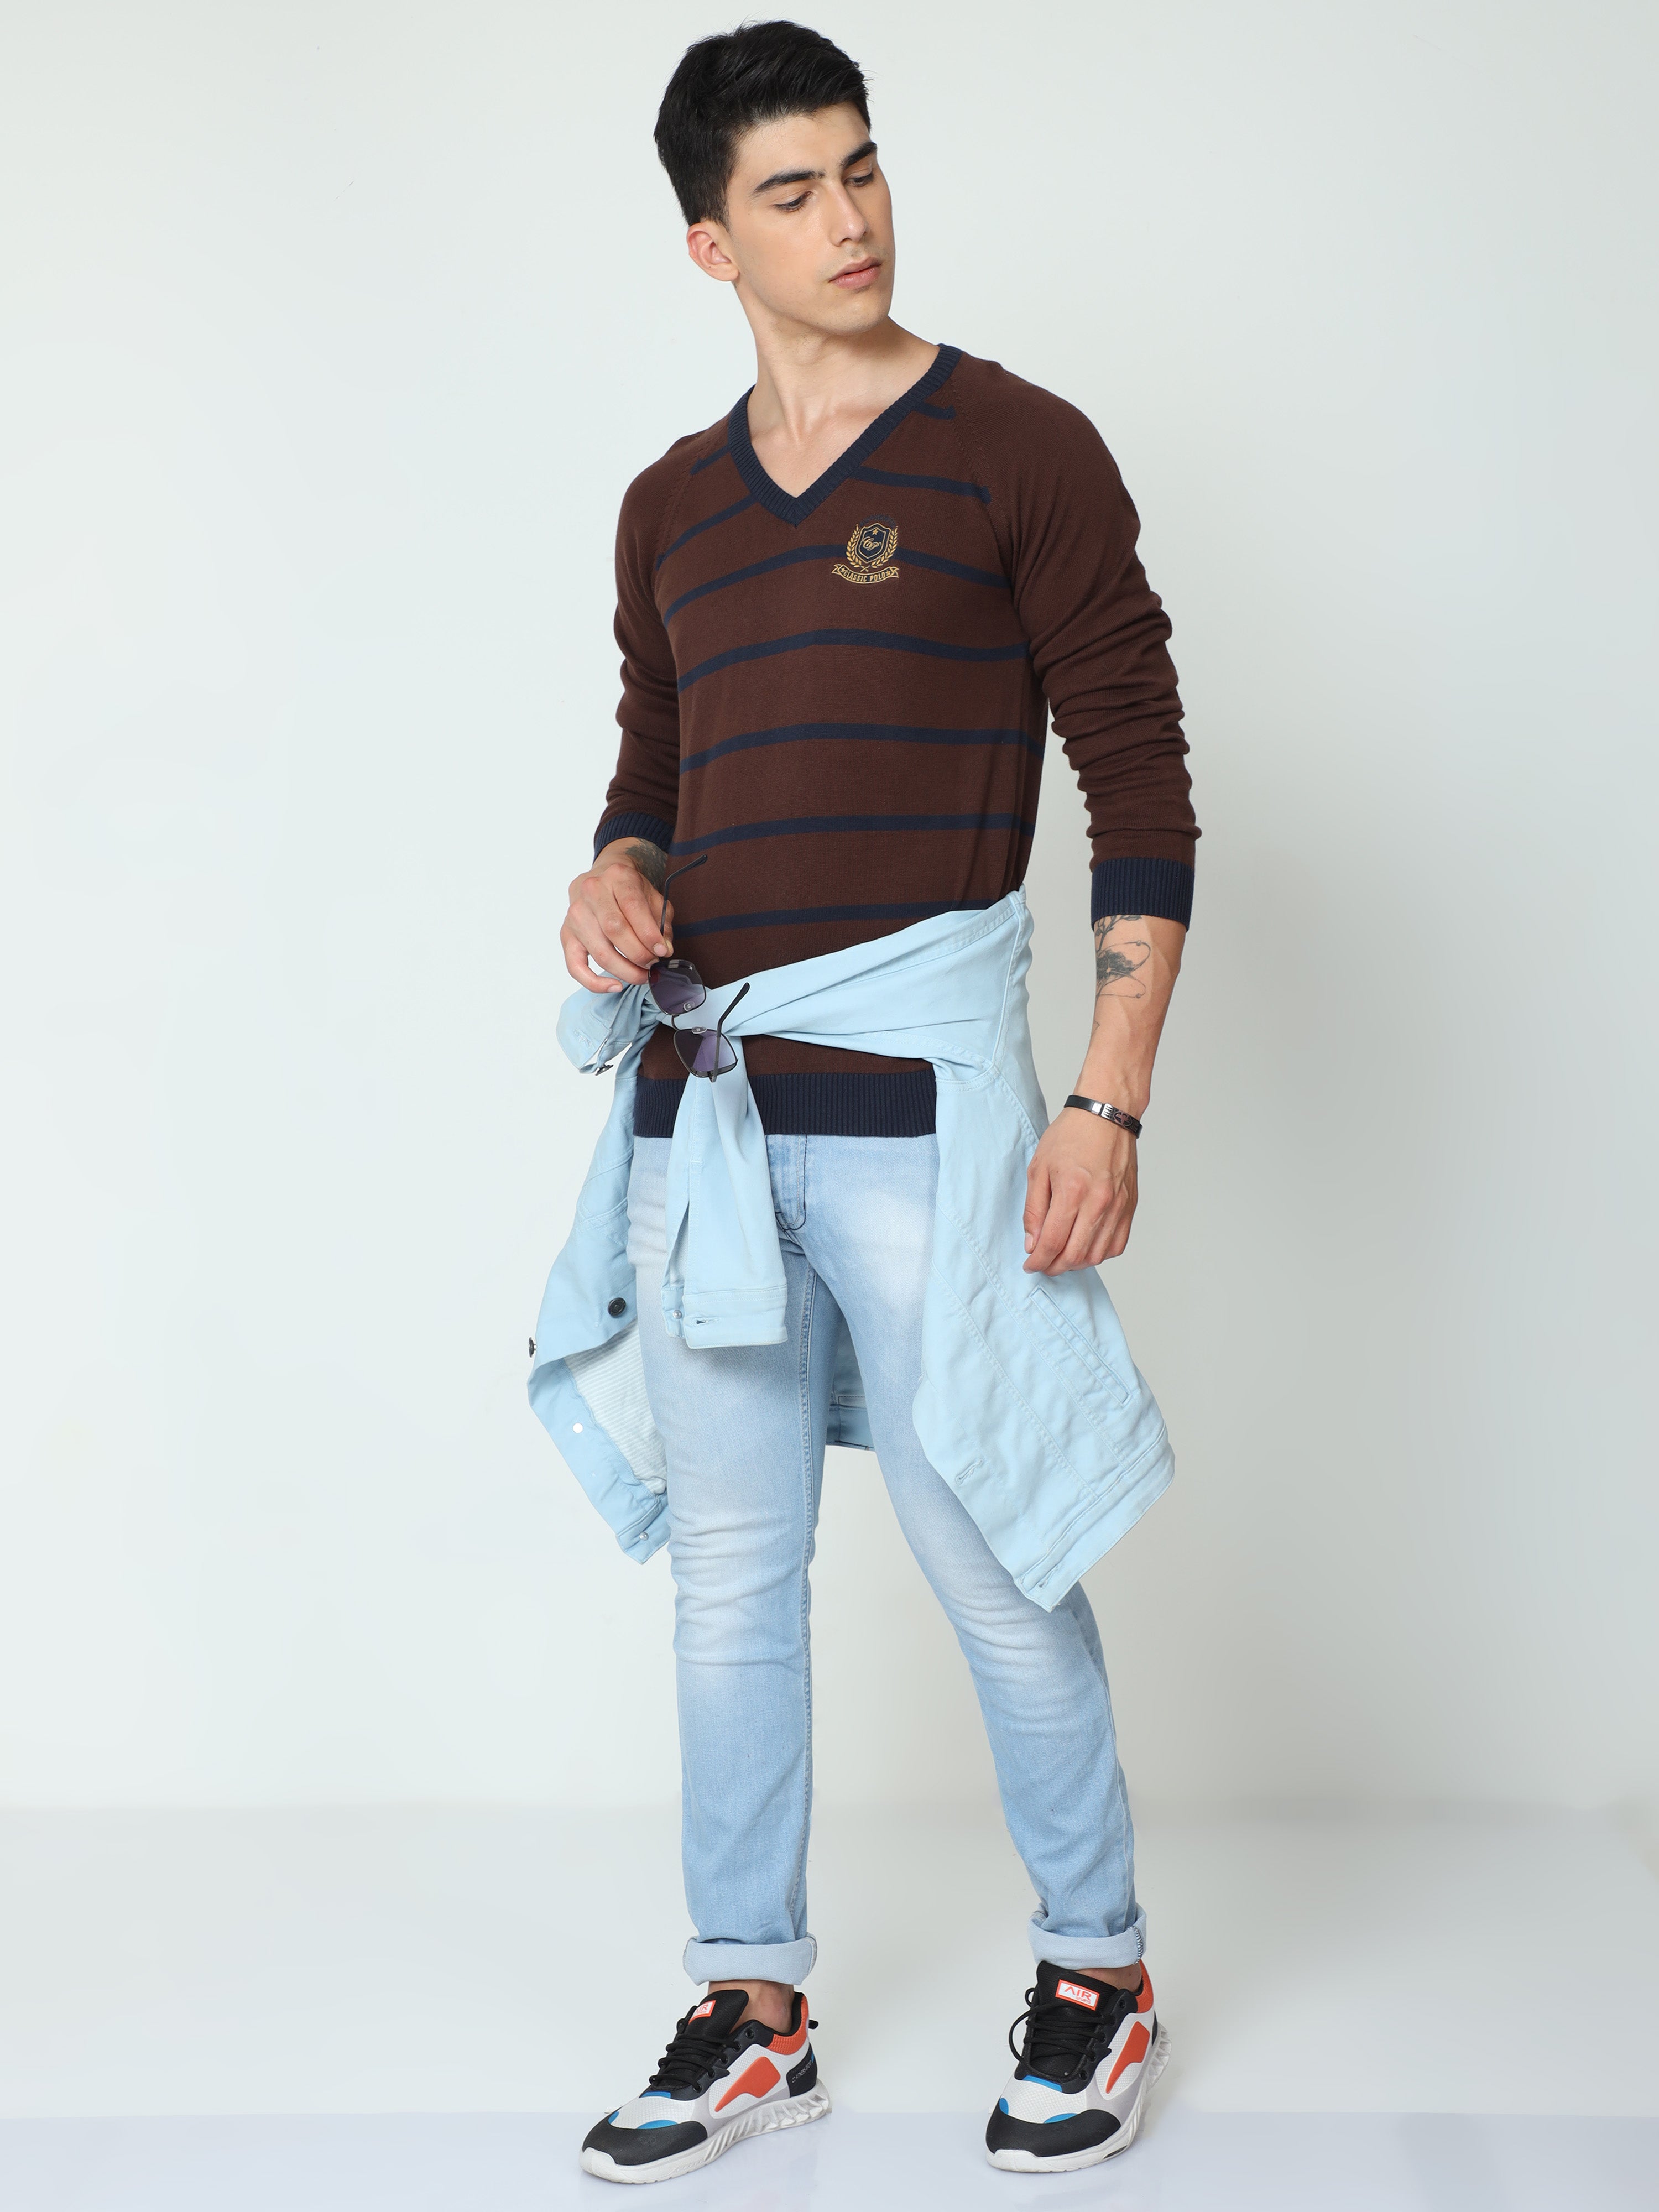 Classic Polo Mens 100% Cotton Maroon Striped V Neck Full Sleeves Slim Fit Sweater |Cp-Swt-05